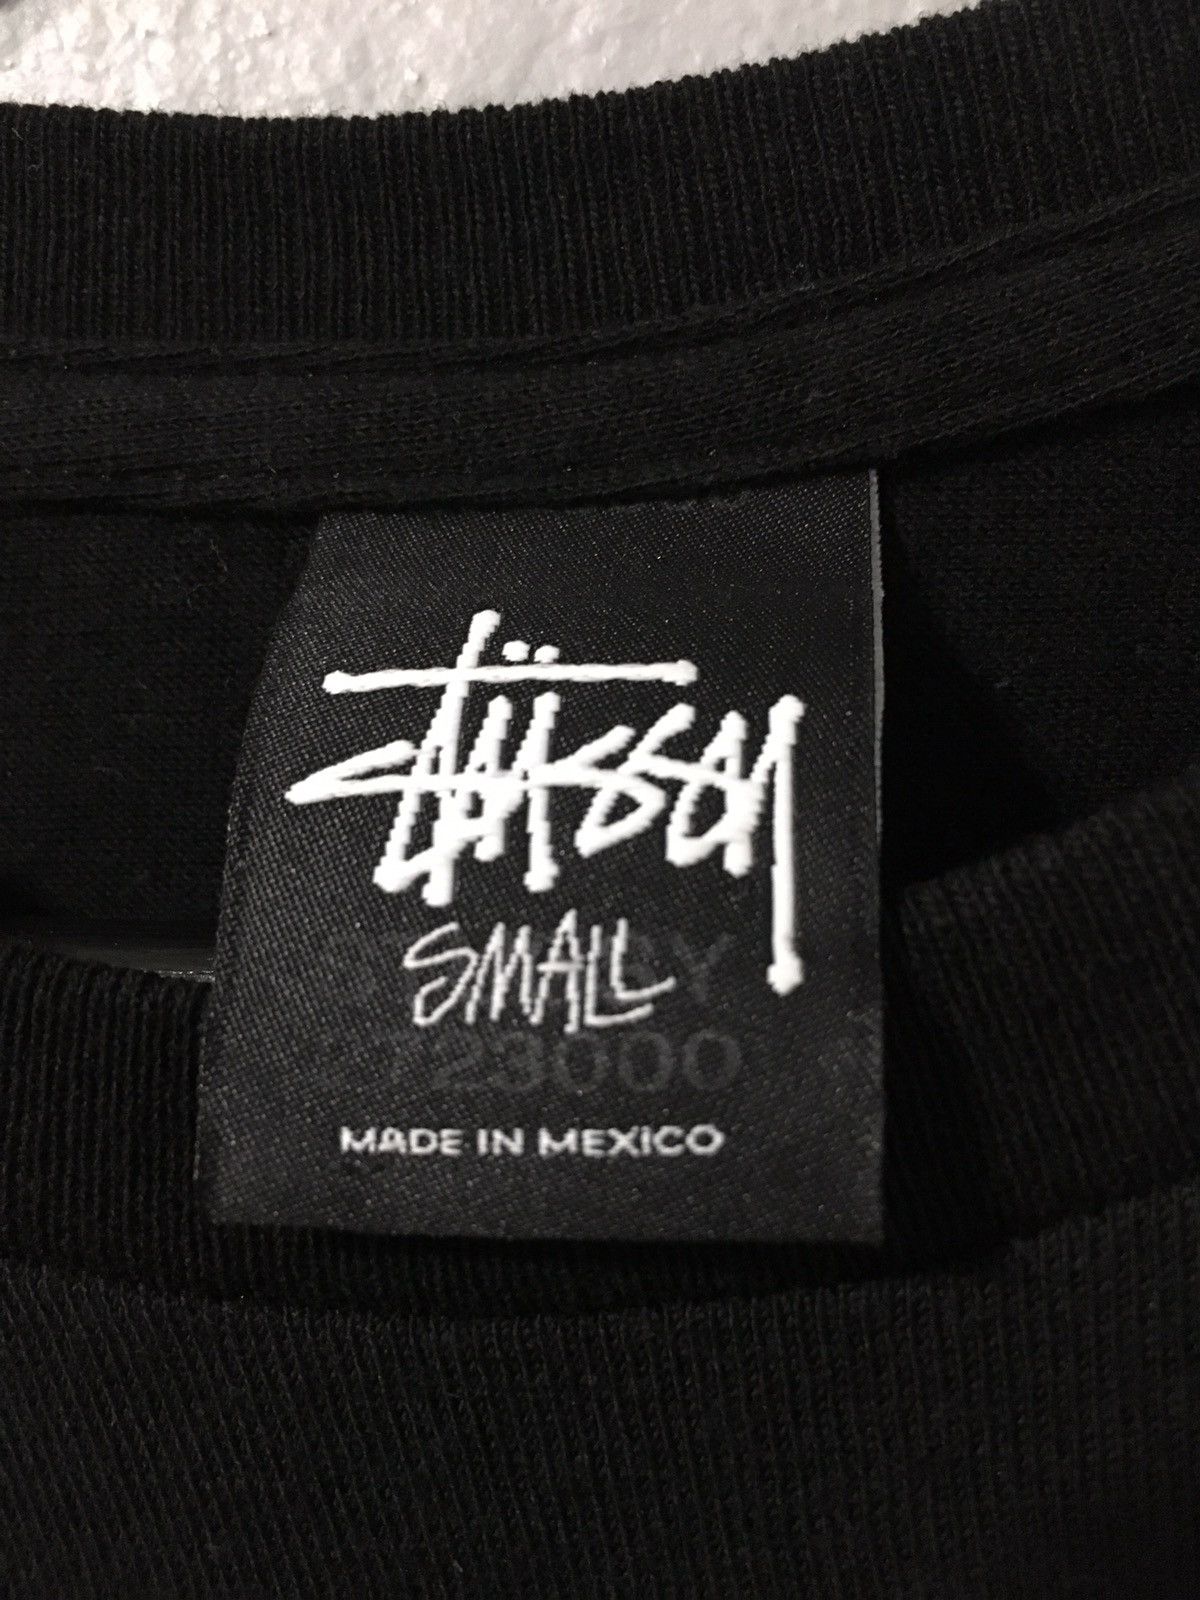 Stussy Christmas Tee Size US S / EU 44-46 / 1 - 2 Preview